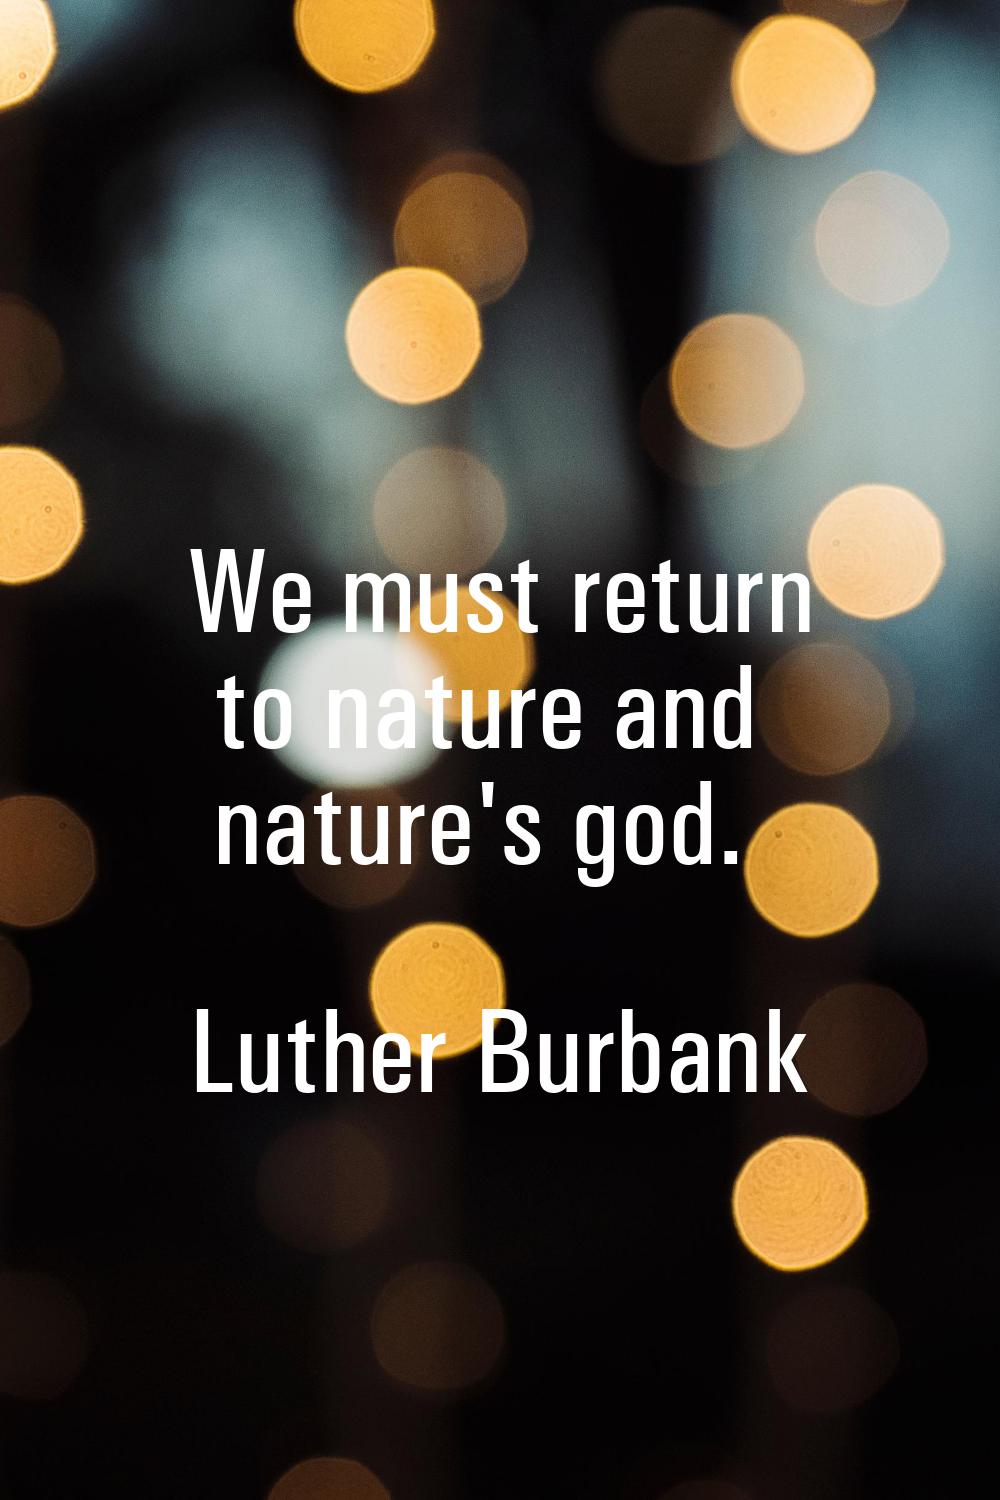 We must return to nature and nature's god.